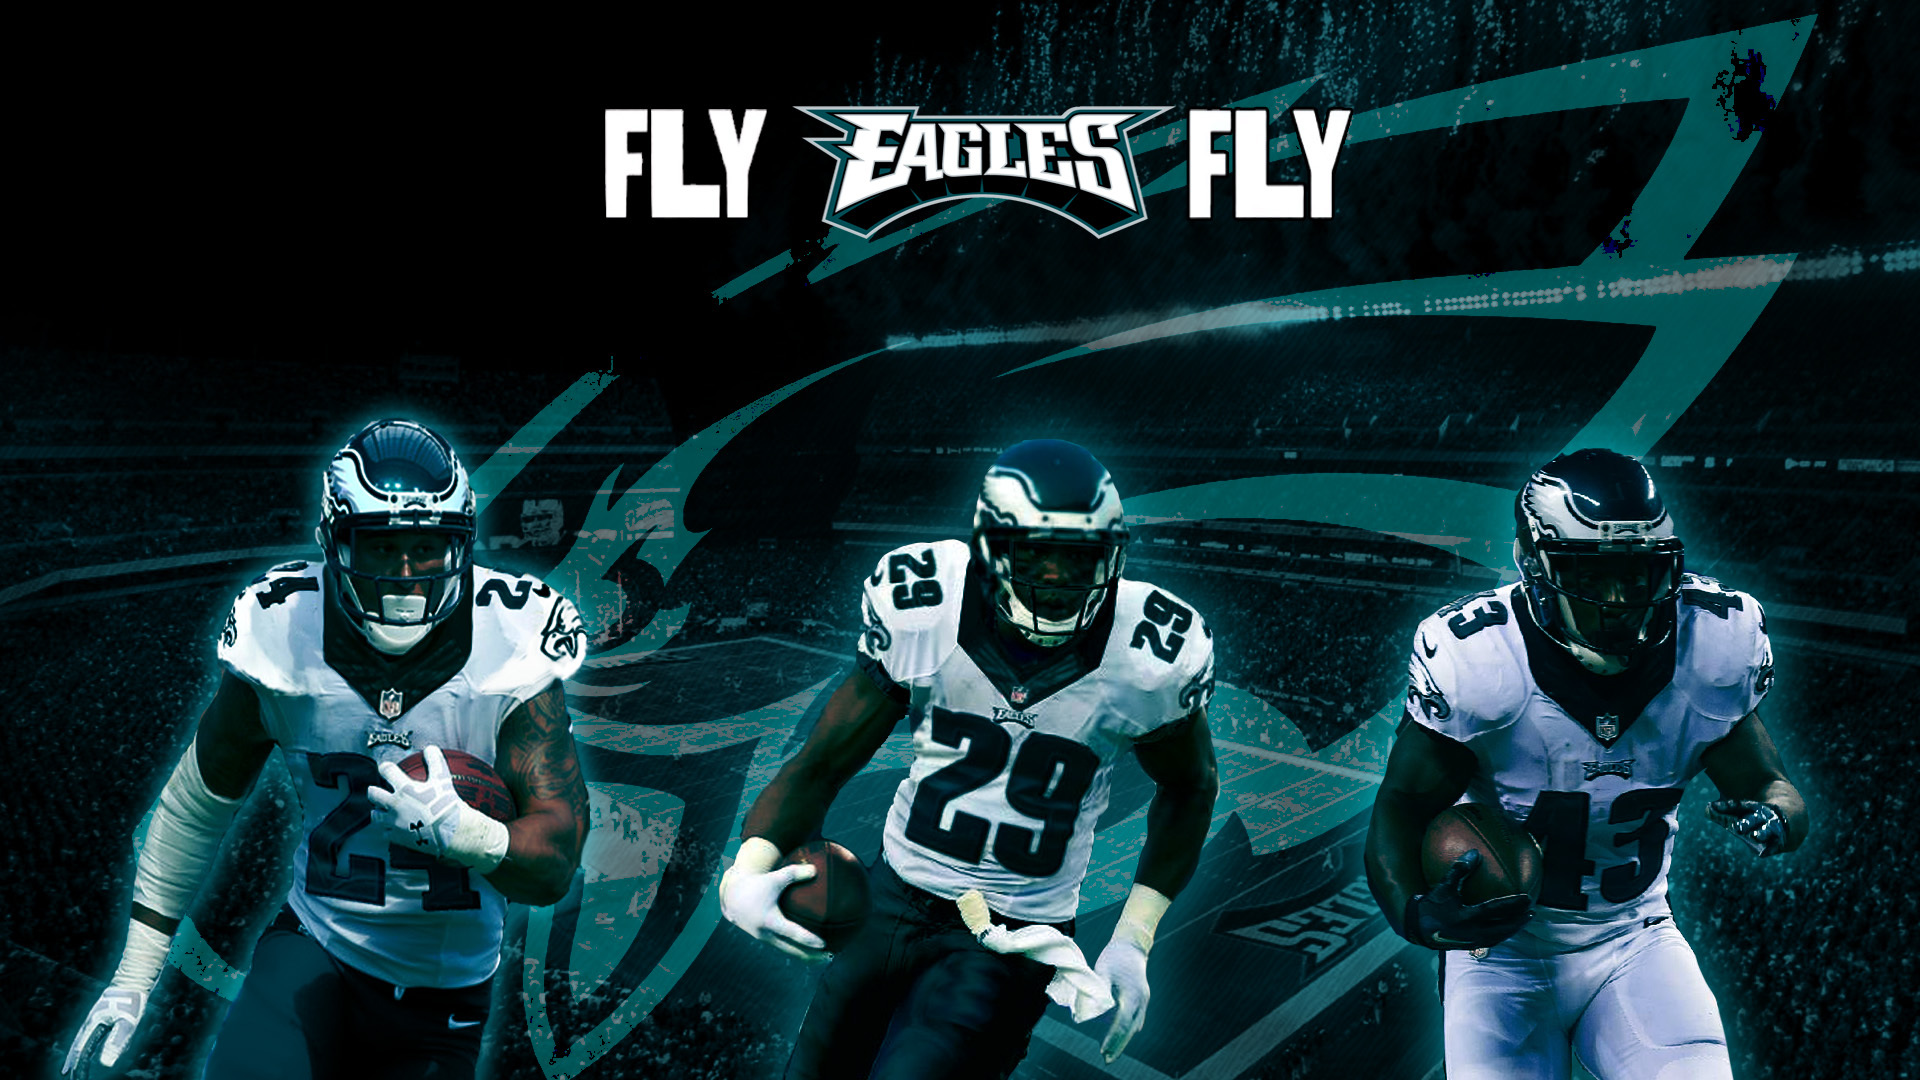 Philadelphia Eagles Wallpapers Images Photos Pictures Backgrounds